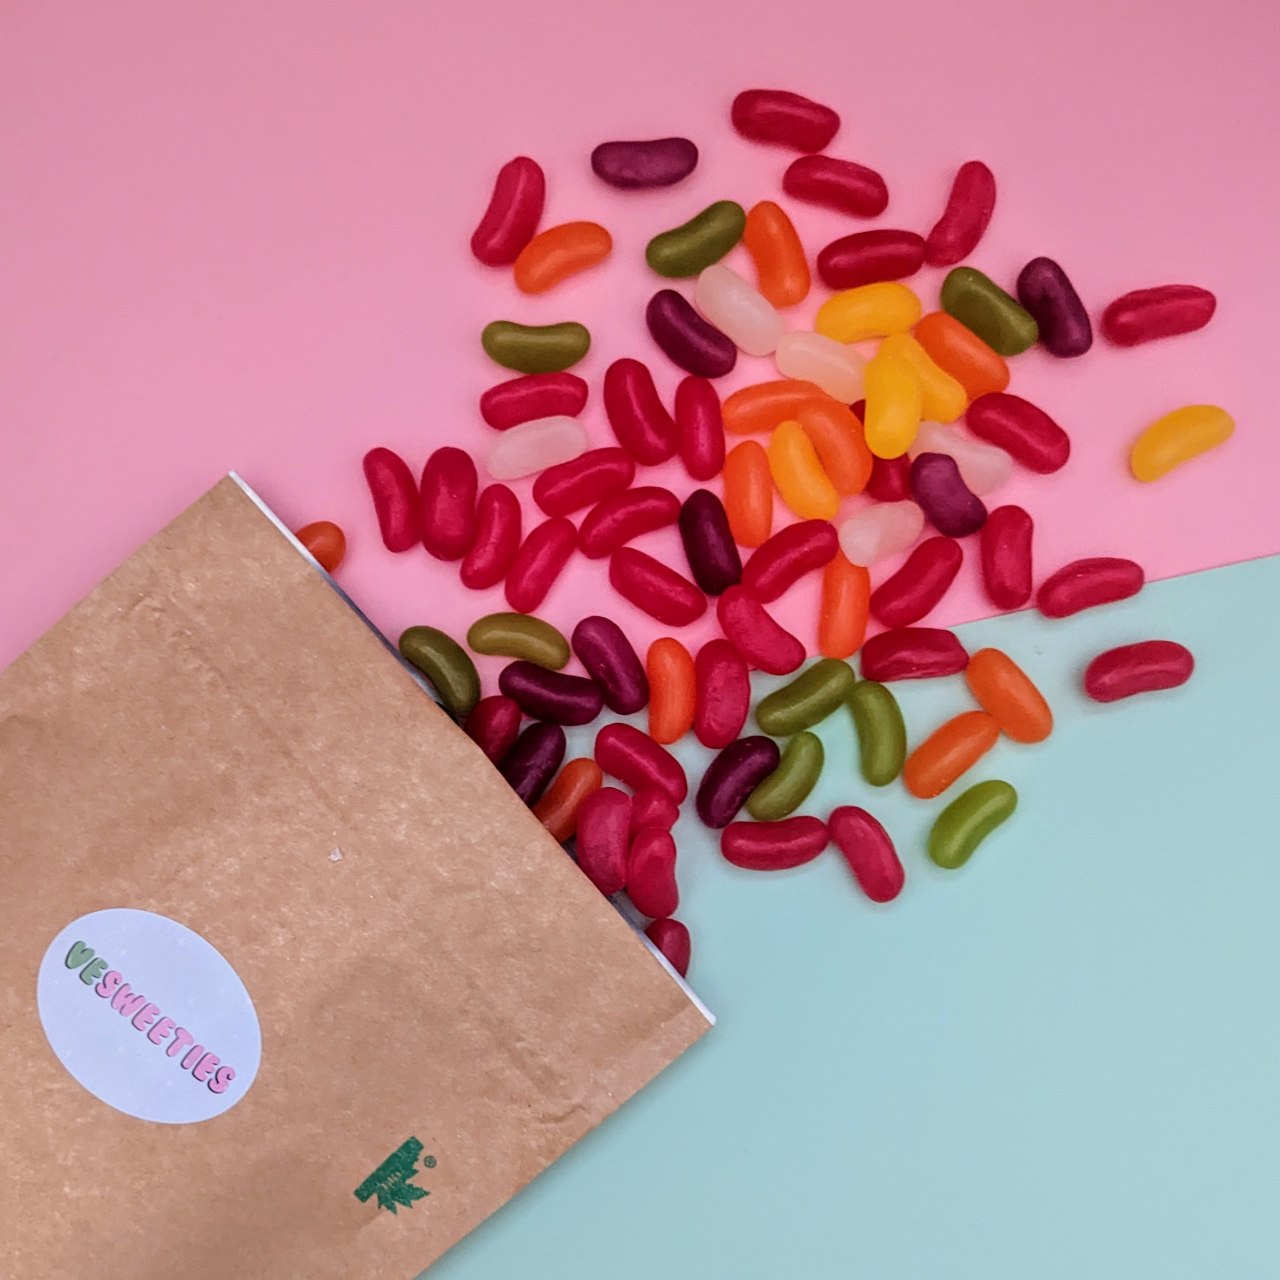 Vegan favourites sweet pouch jelly beans